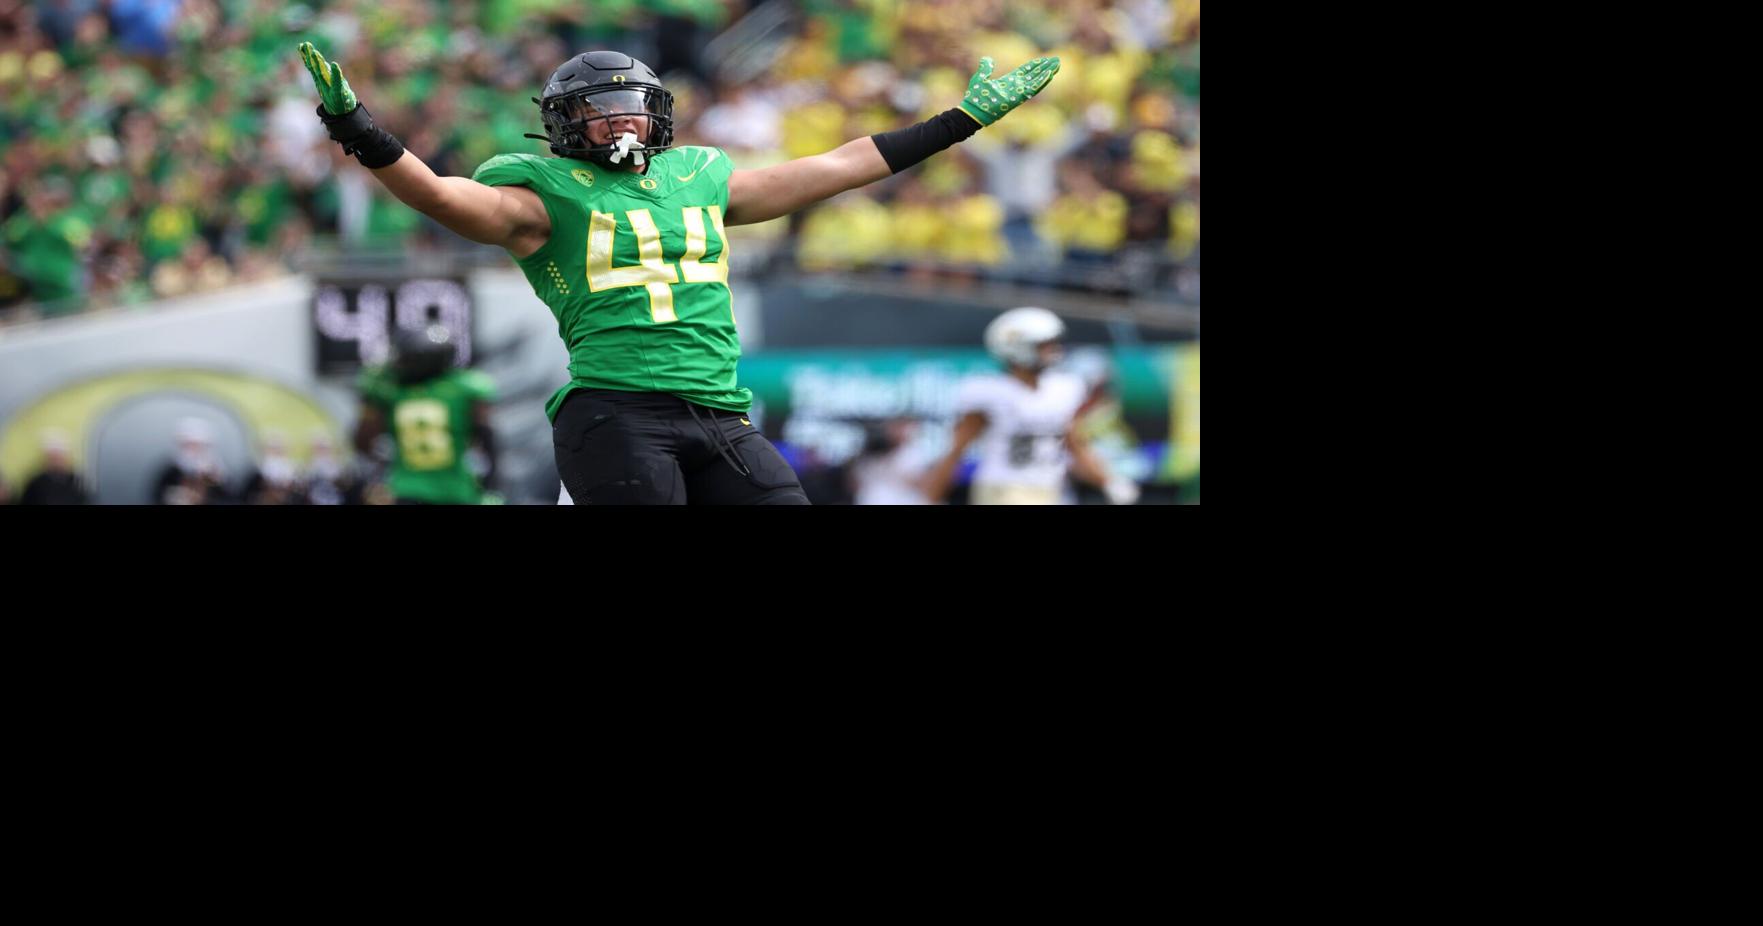 10 things about new Ducks Oregon pioneer uniforms